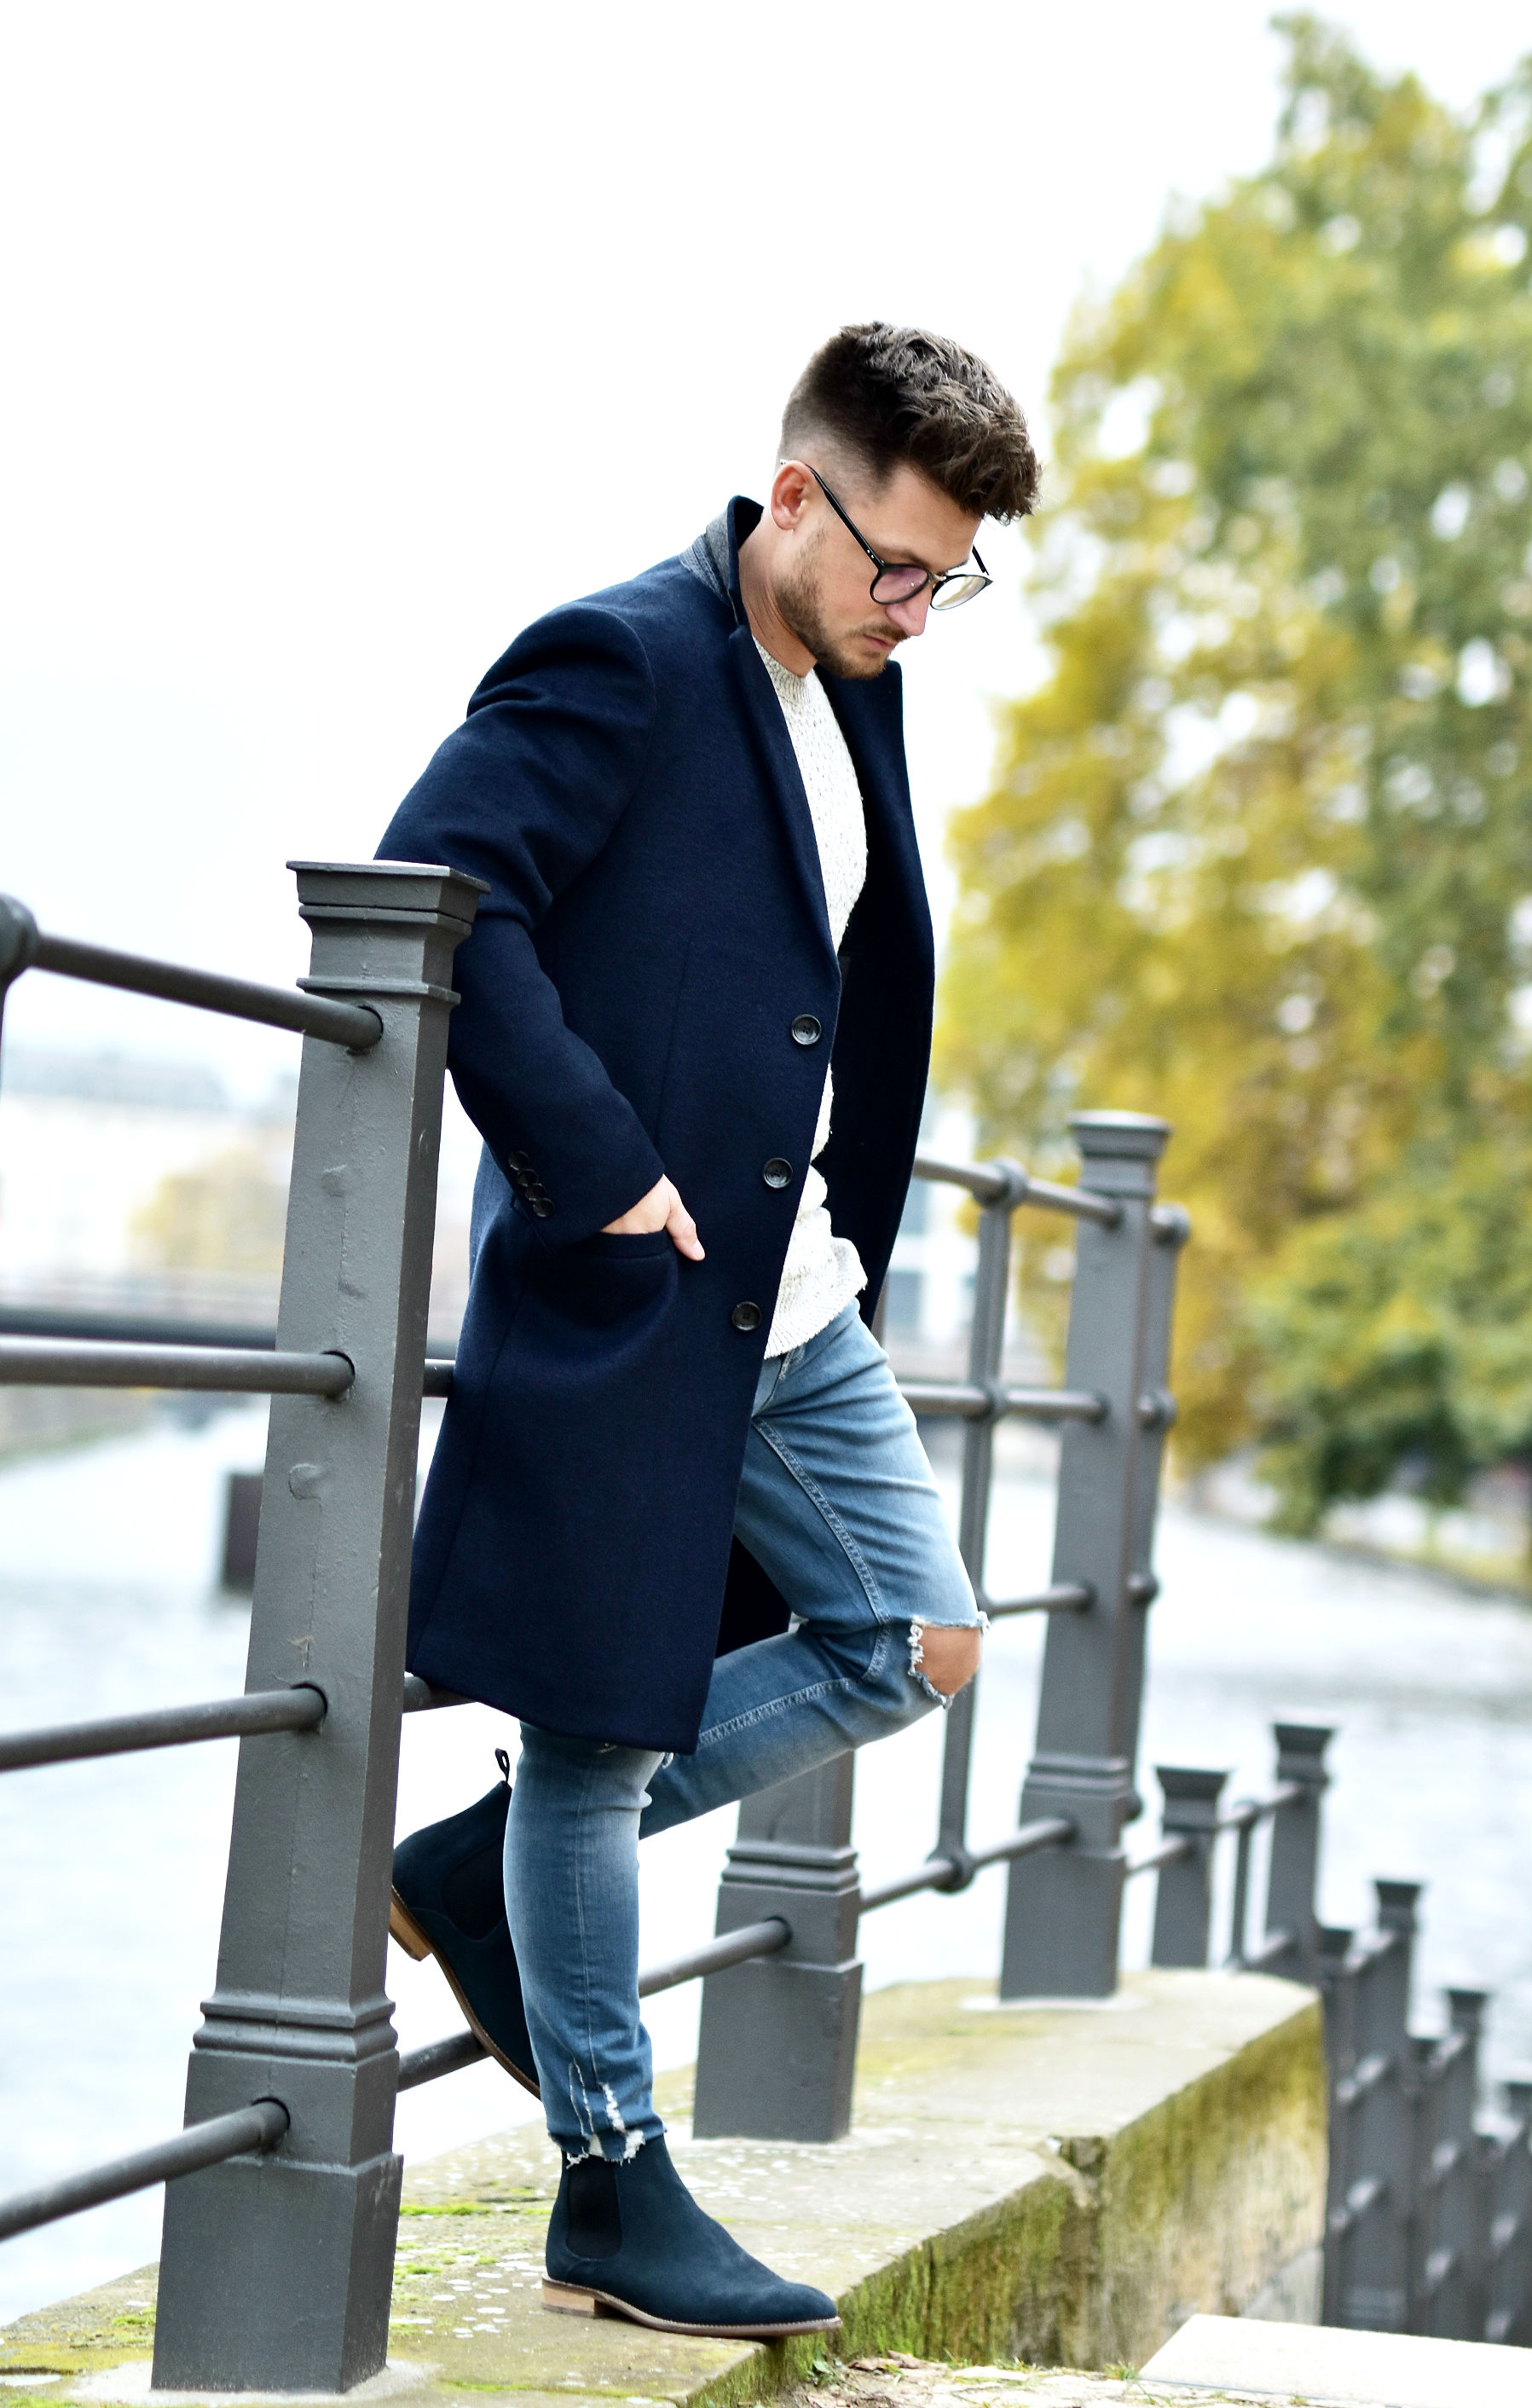 tommeezjerry-styleblog-maennerblog-maenner-modeblog-berlin-berlinblog-maennermodeblog-outfit-mantel-marks-and-spencer-coat-chelsea-boots-autumn-look-6